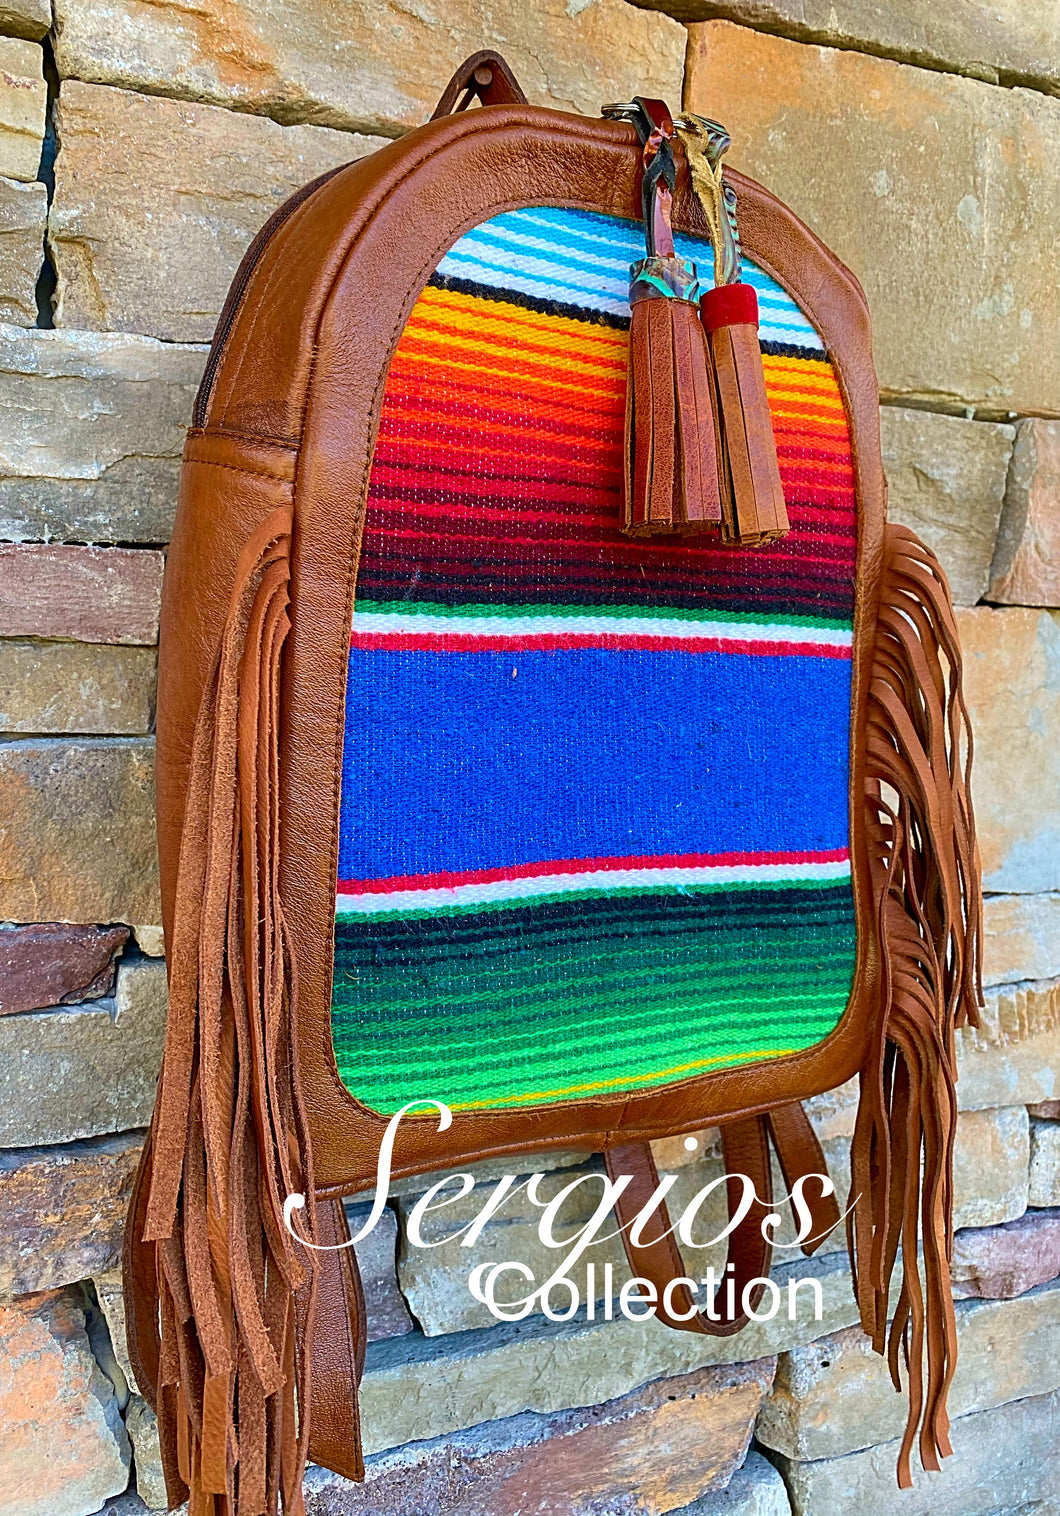 New Mexico Wool blanket backpack